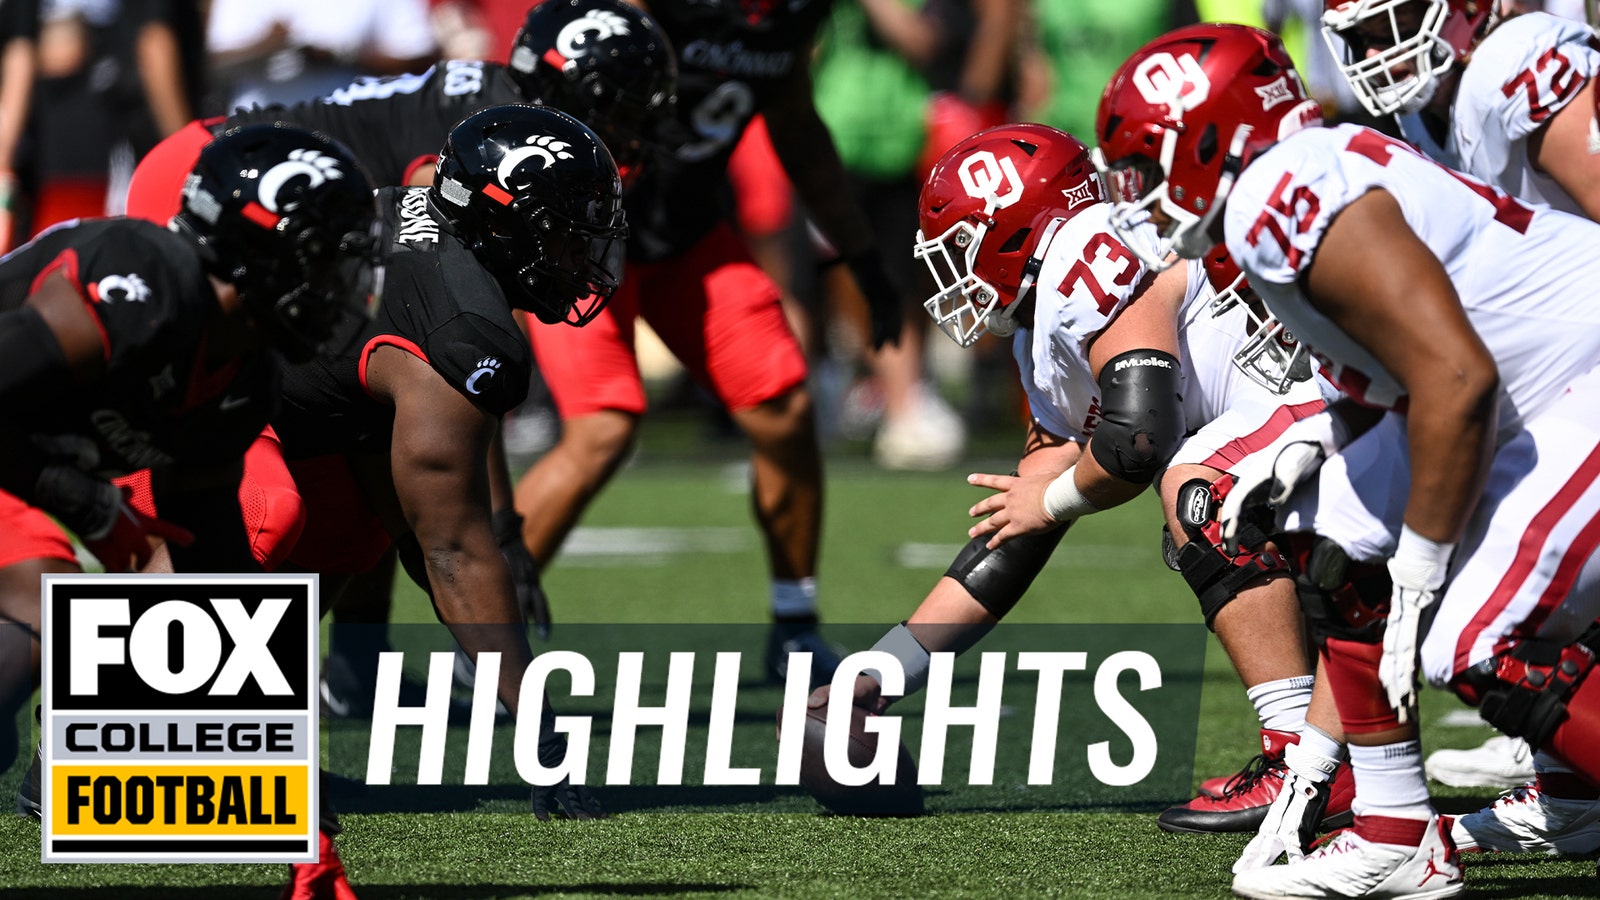 Highlights: All the top plays from Oklahoma's win